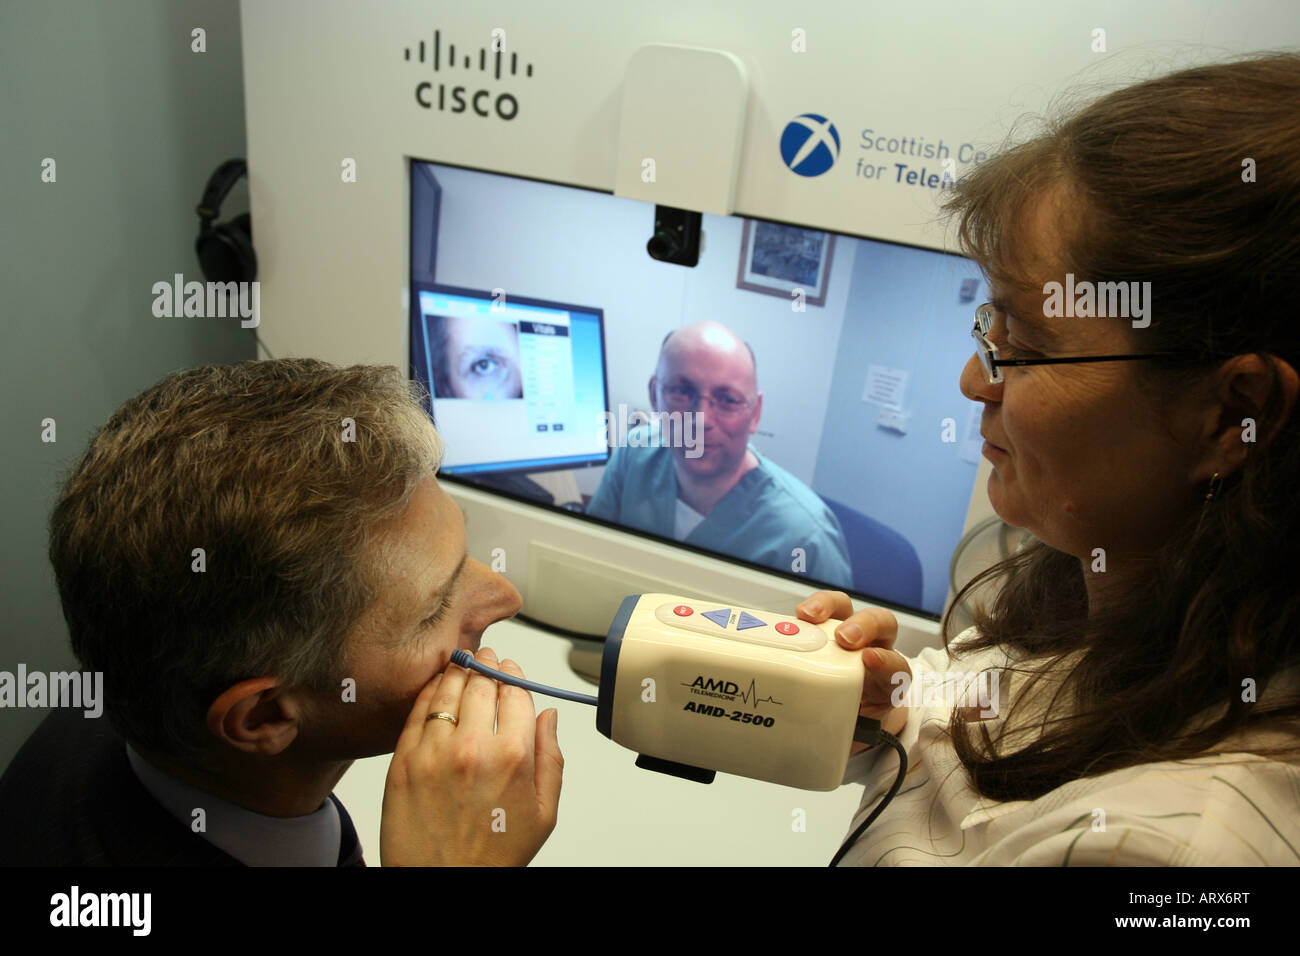 Cisco telecare booth launched at the Scottish Centre for Telehealth at Aberdeen Royal Infirmary which uses live video Stock Photo